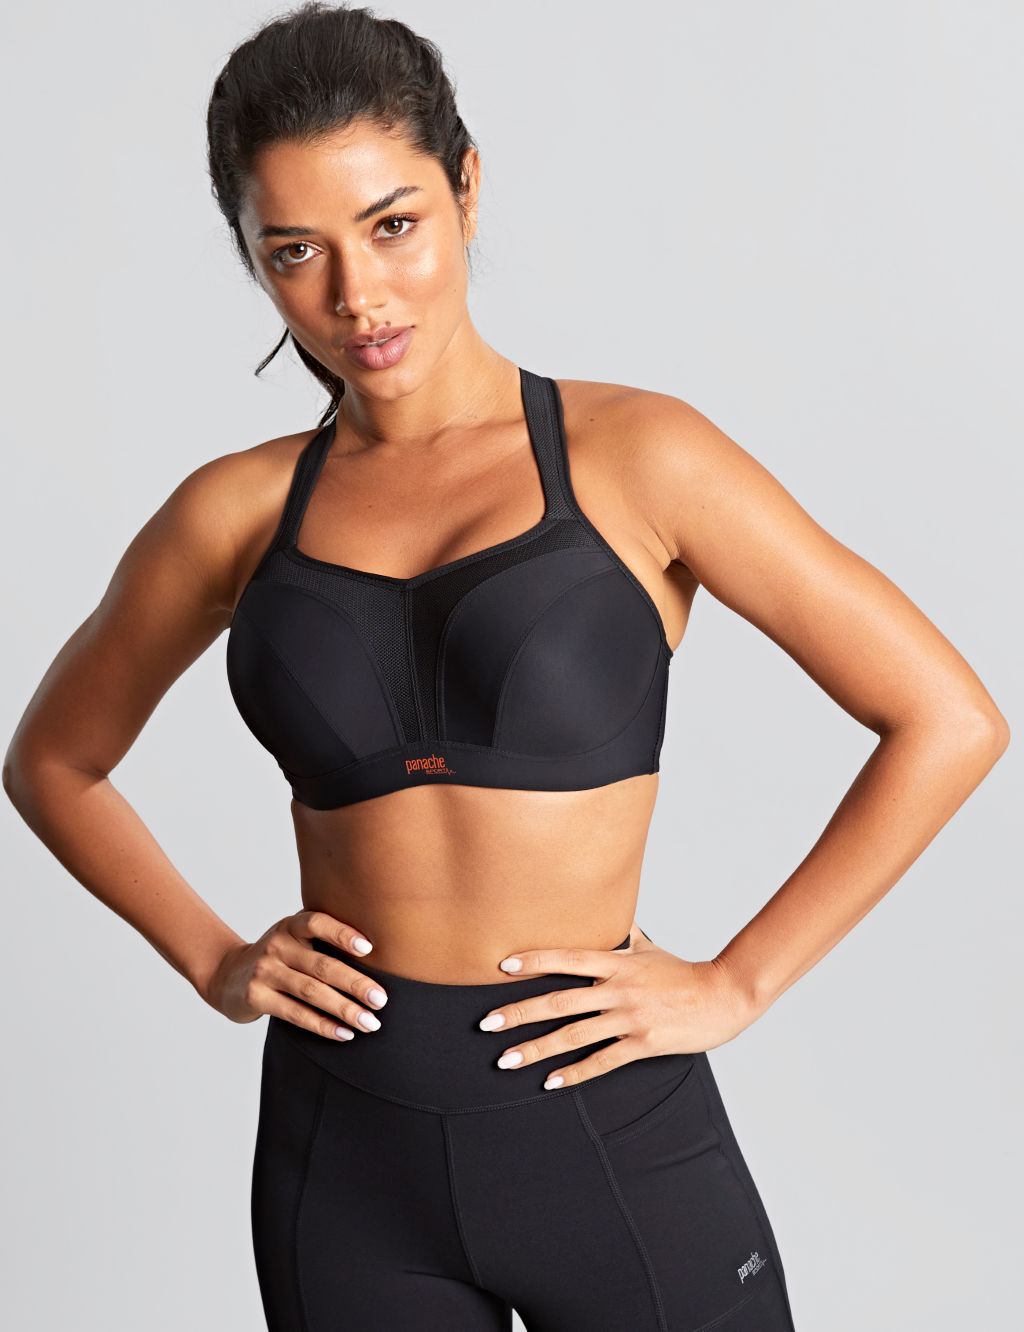 Ultimate Support Wired Sports Bra D-J image 1